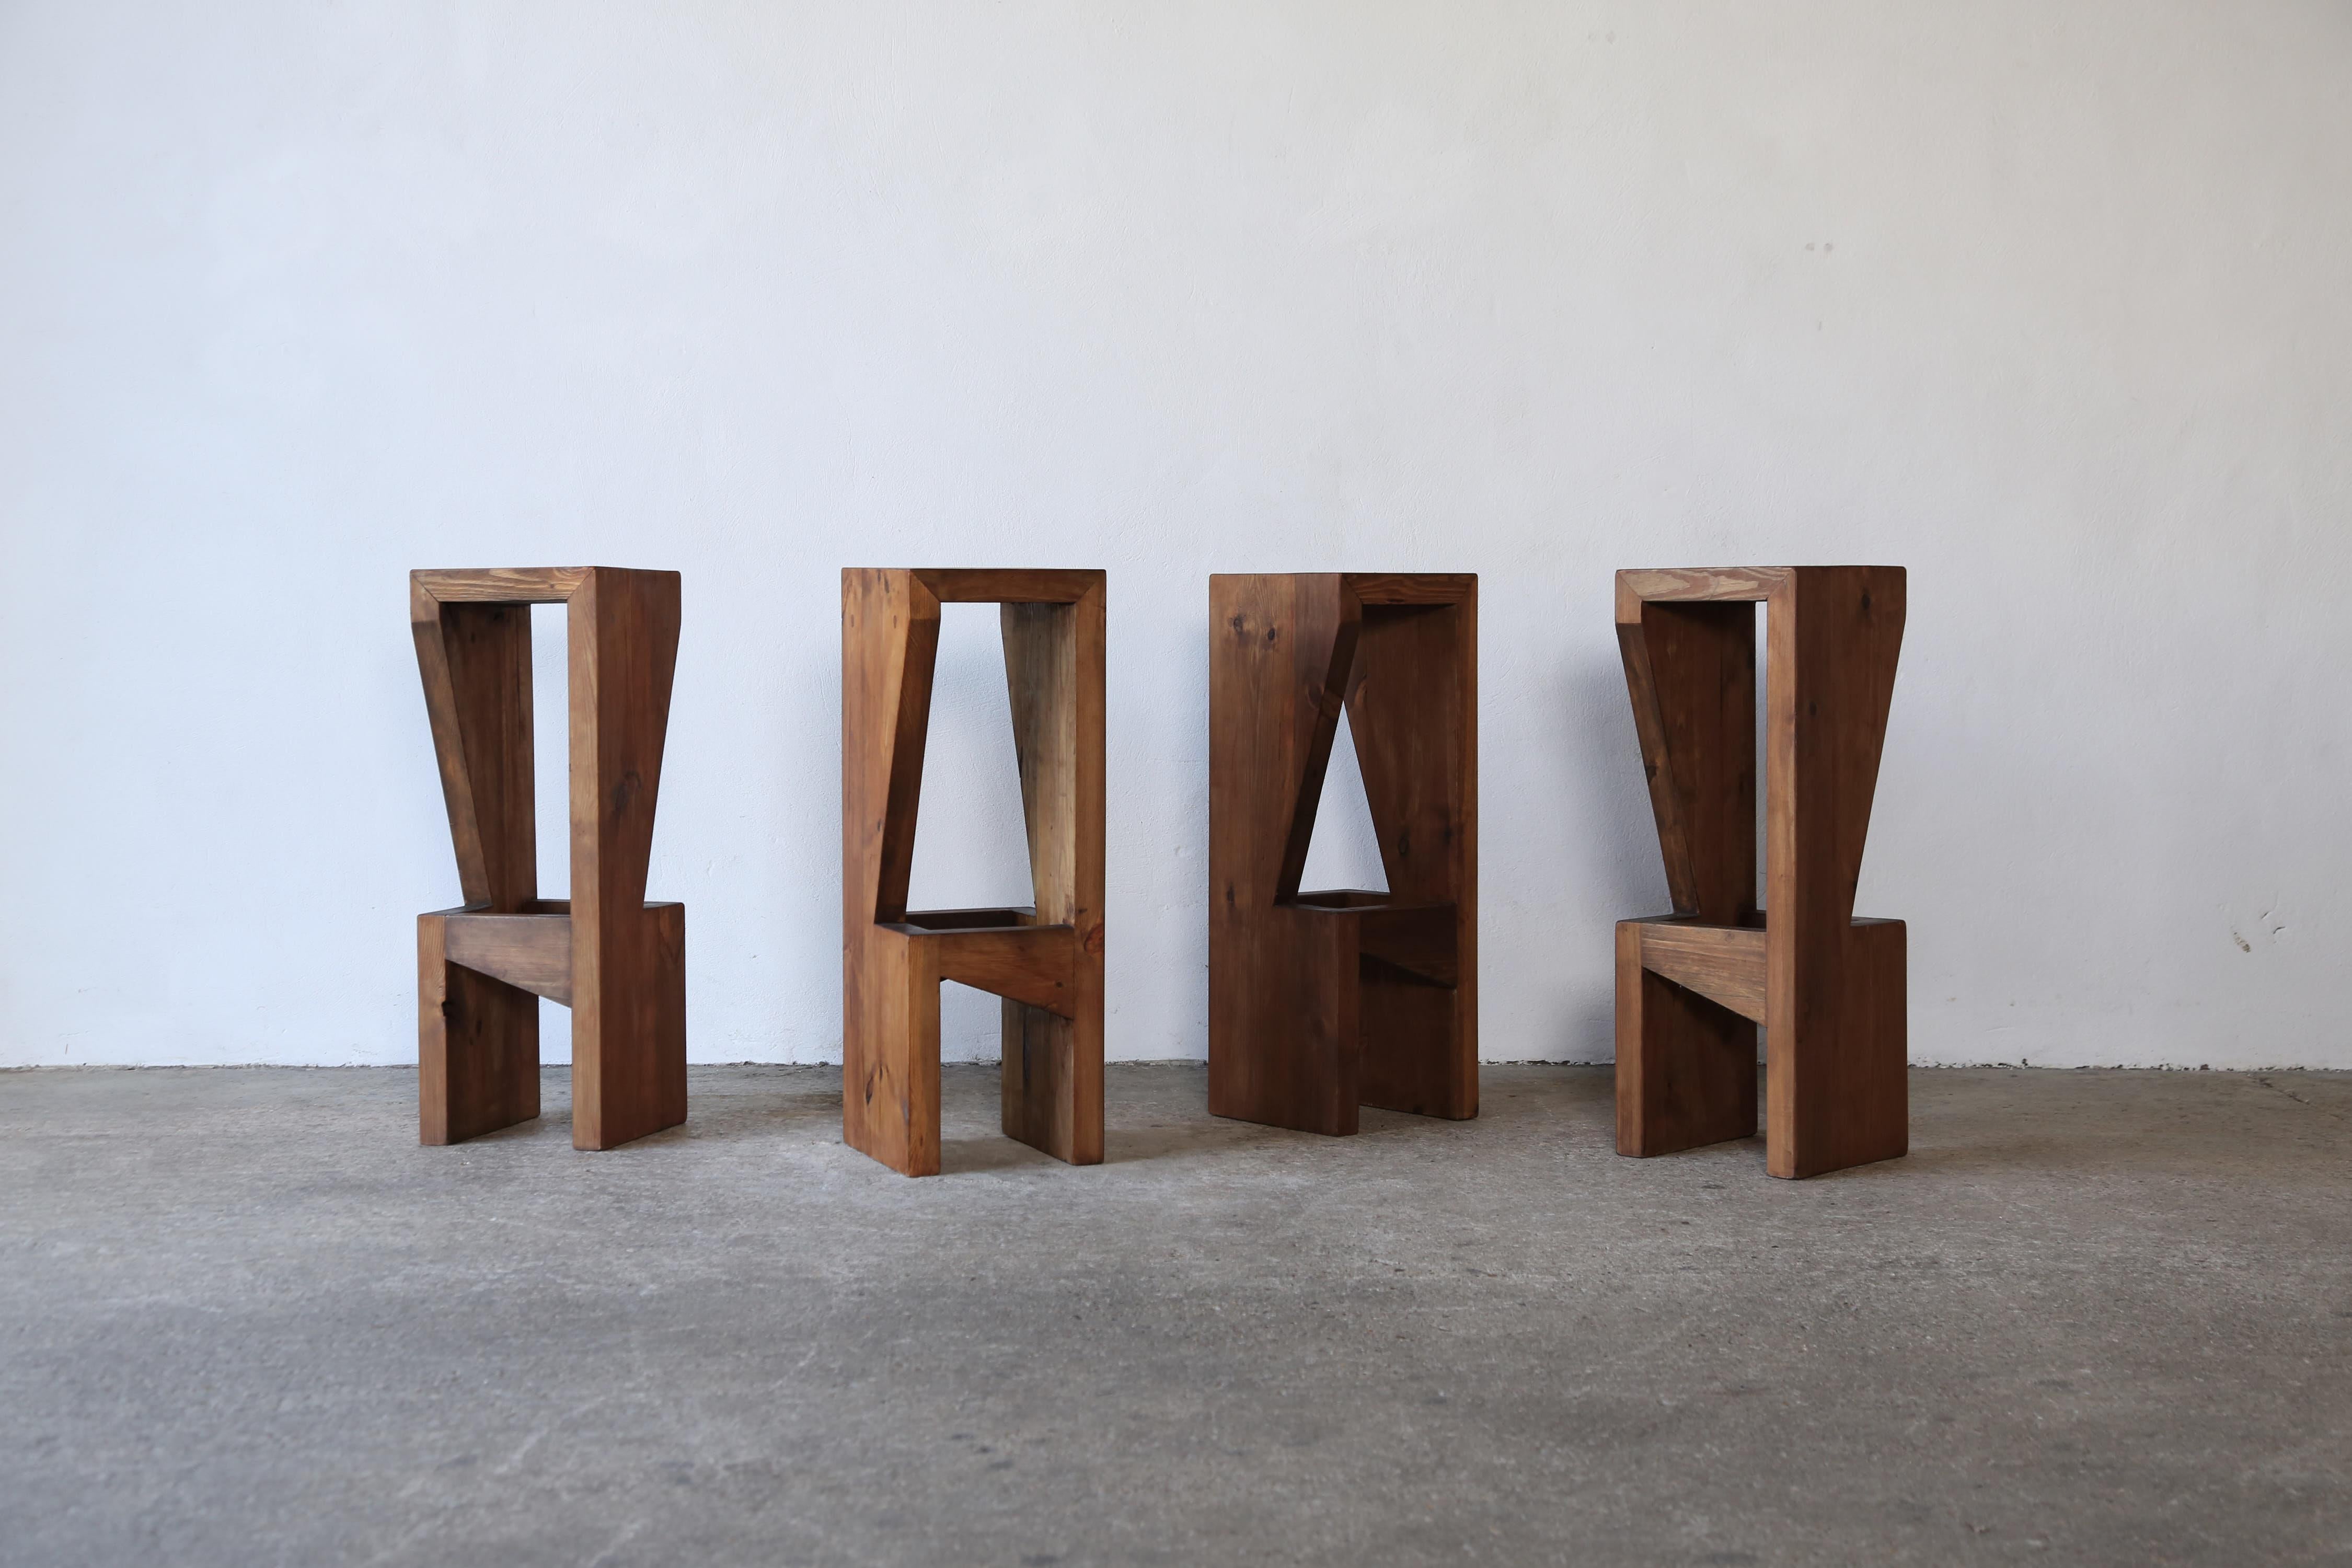 Modern stools in pine.   Priced individually / per stool.   Fast shipping worldwide.

